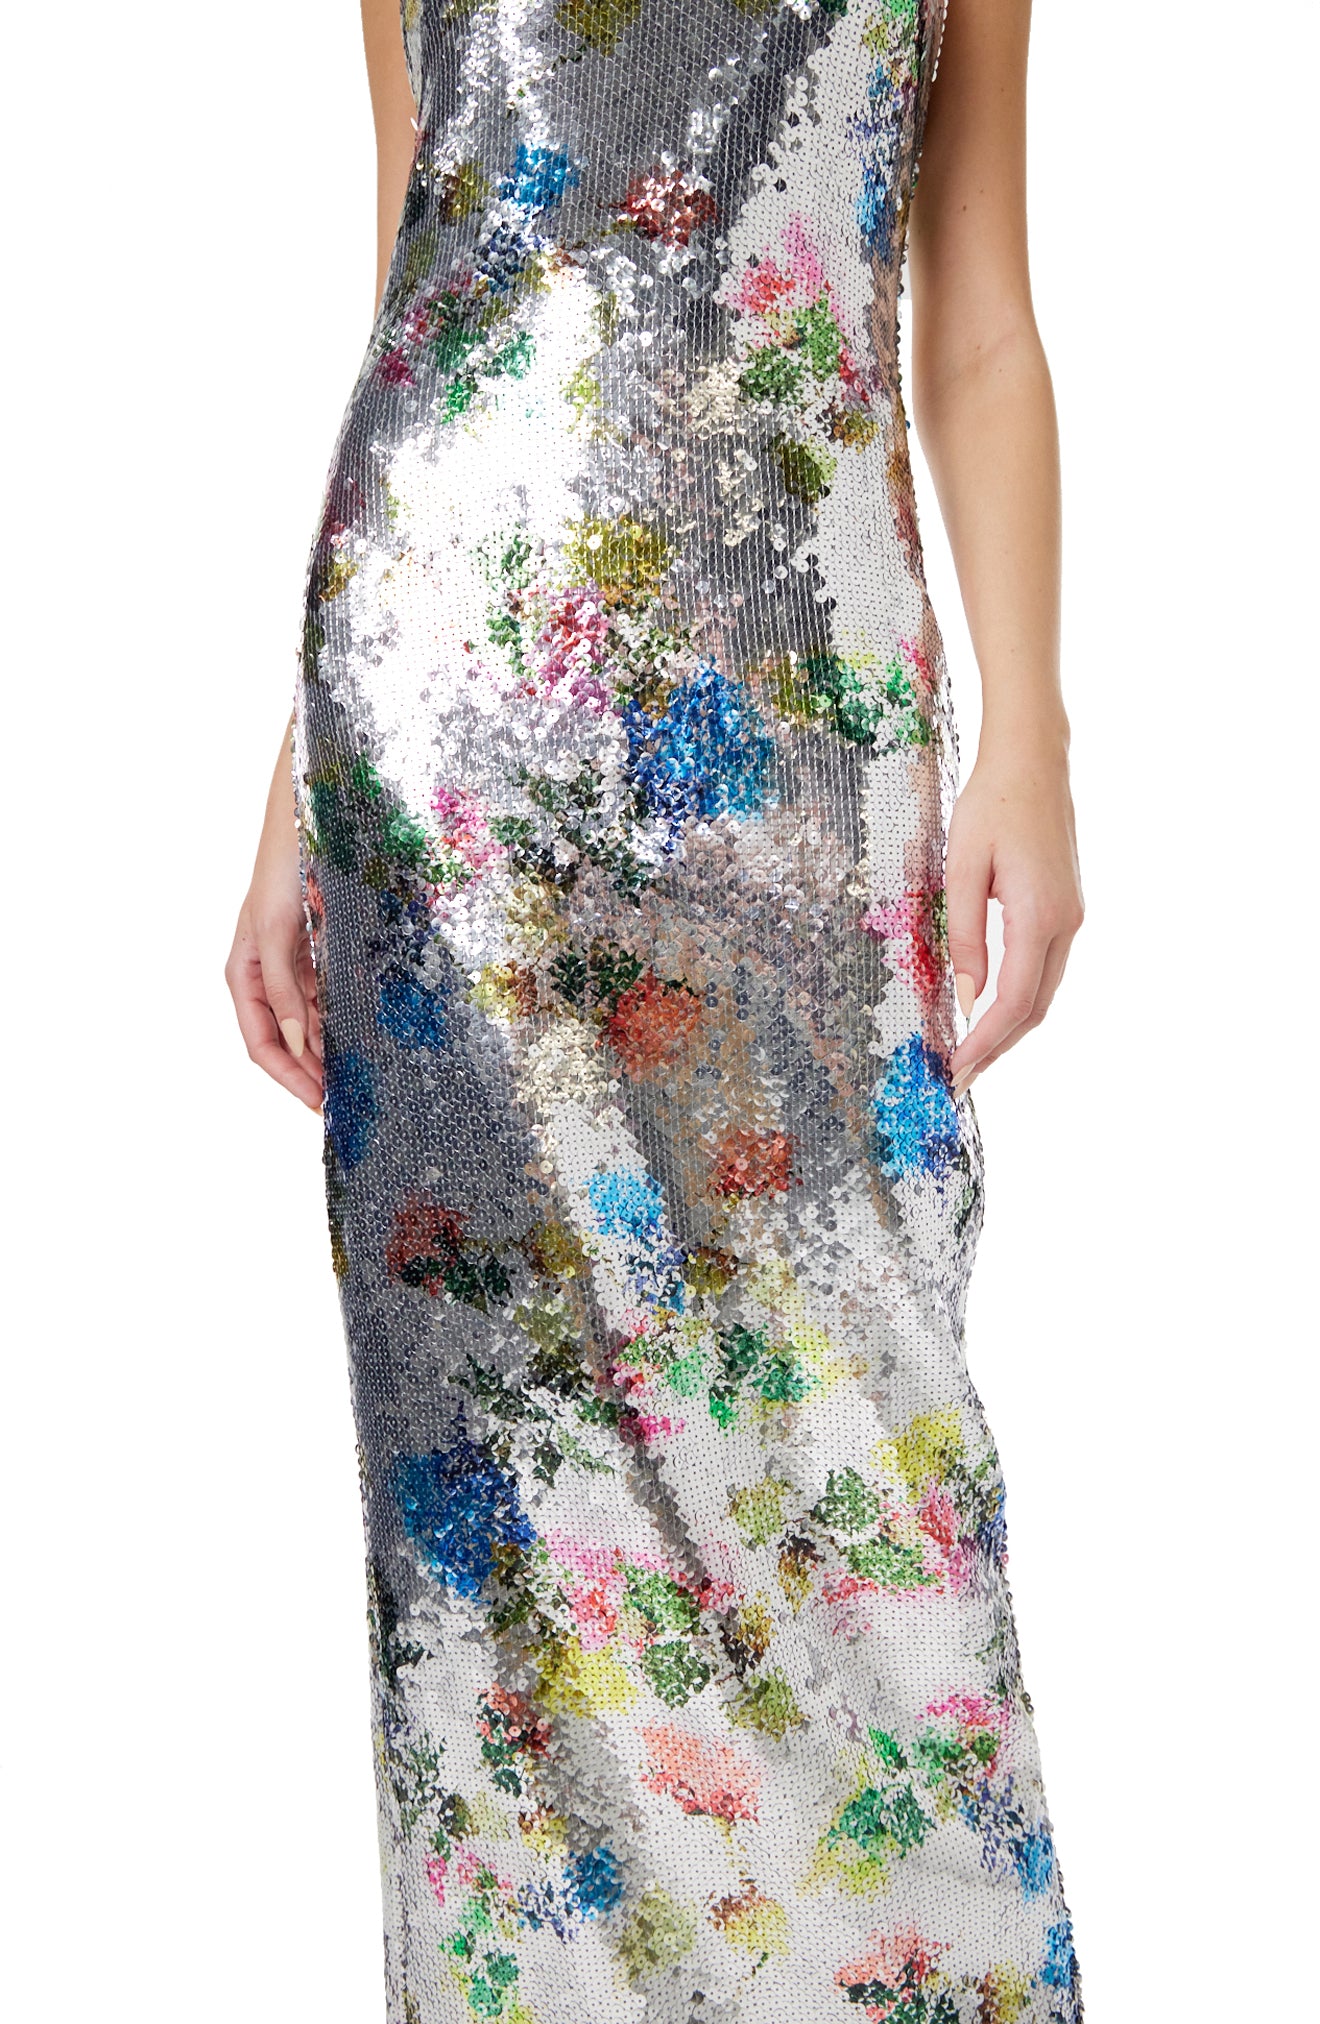 Monique Lhuillier Spring 2024 printed silver sequin colum gown with sleeveless, cut-away neckline - embroidery detail.